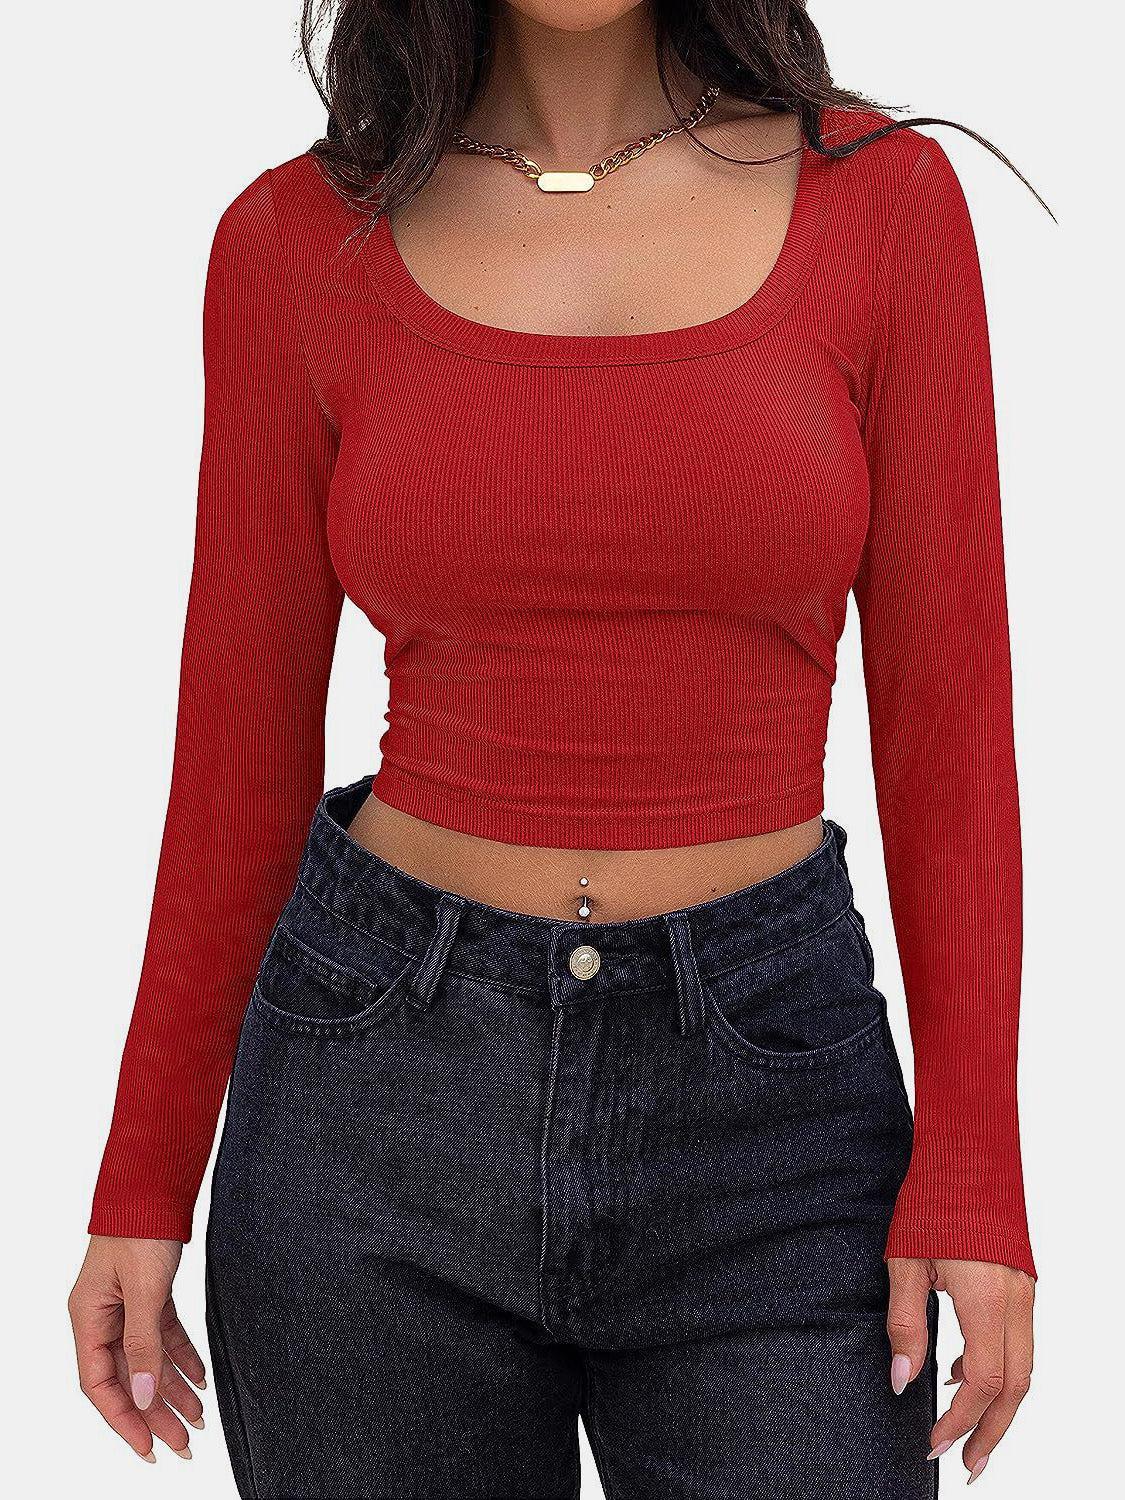 a woman wearing a red top and jeans